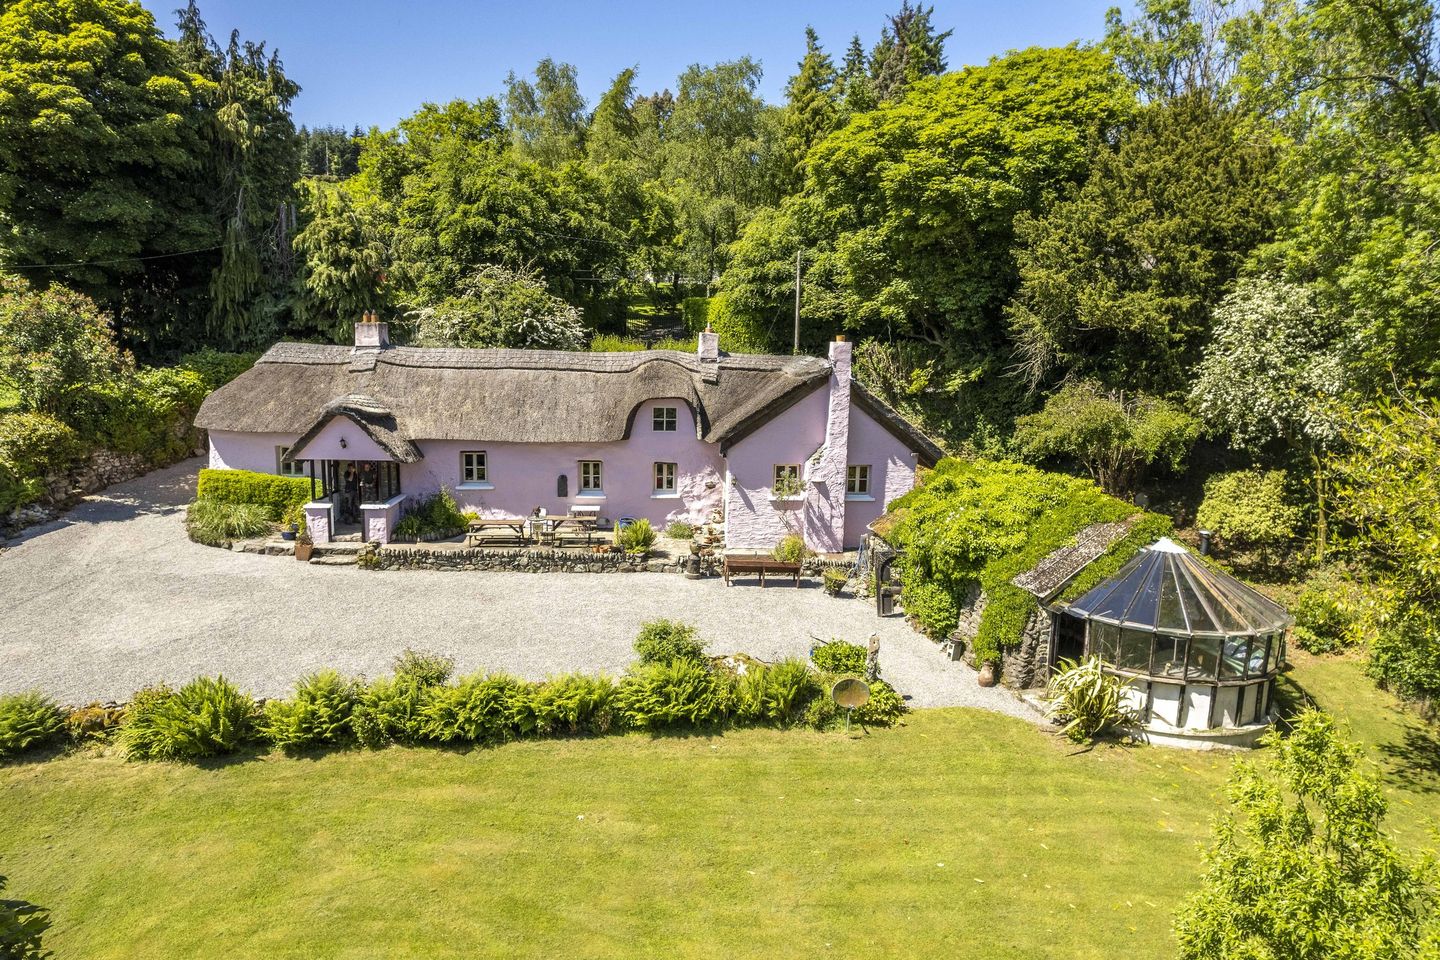 Aghowle Cottage, Aghowle Upper, Ashford, Co. Wicklow, A67XE44